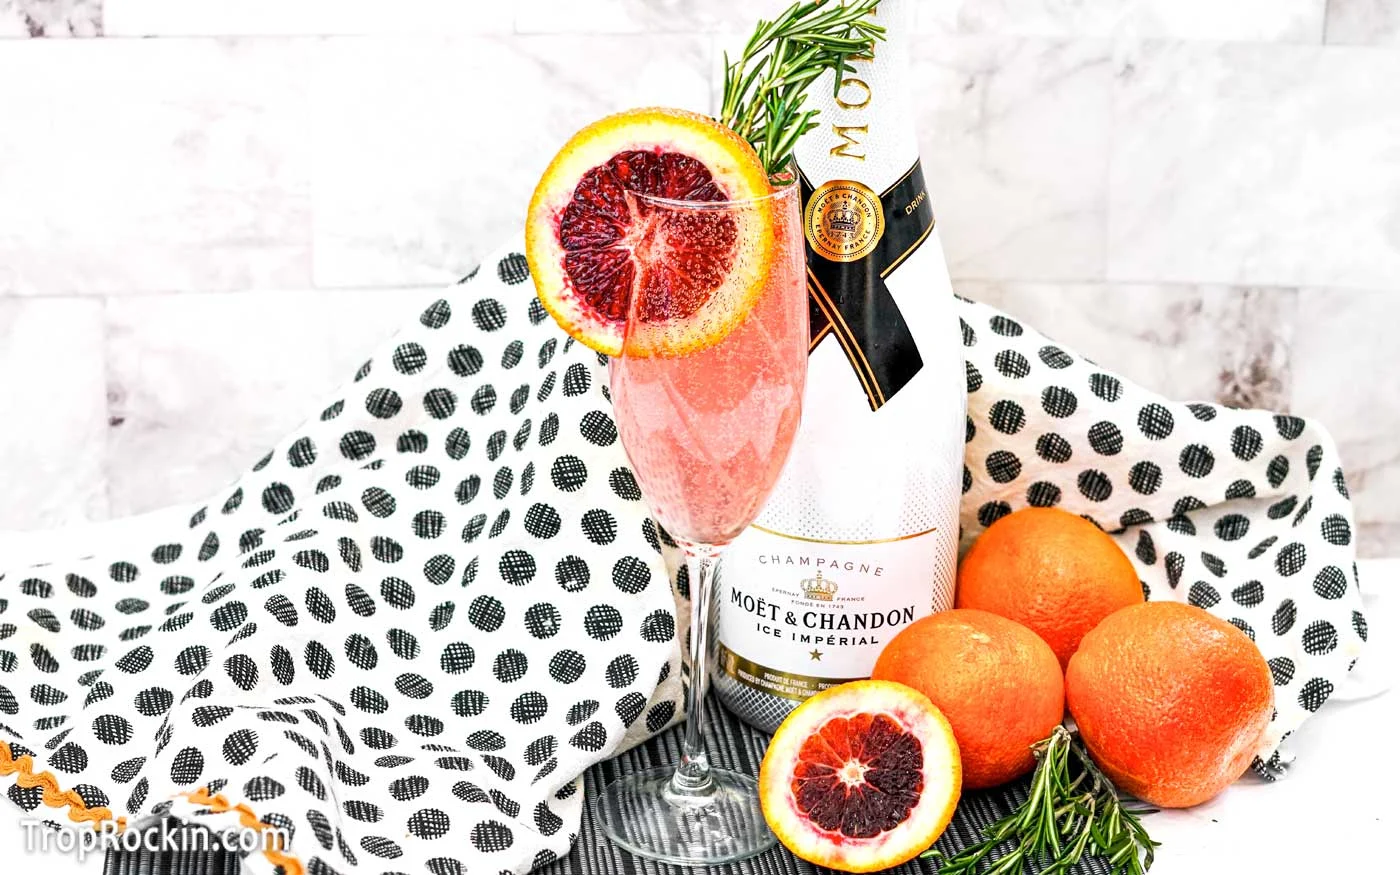 Blood Orange Mimosa with garnishes and a bottle of champagne in the background as well as blood oranges.